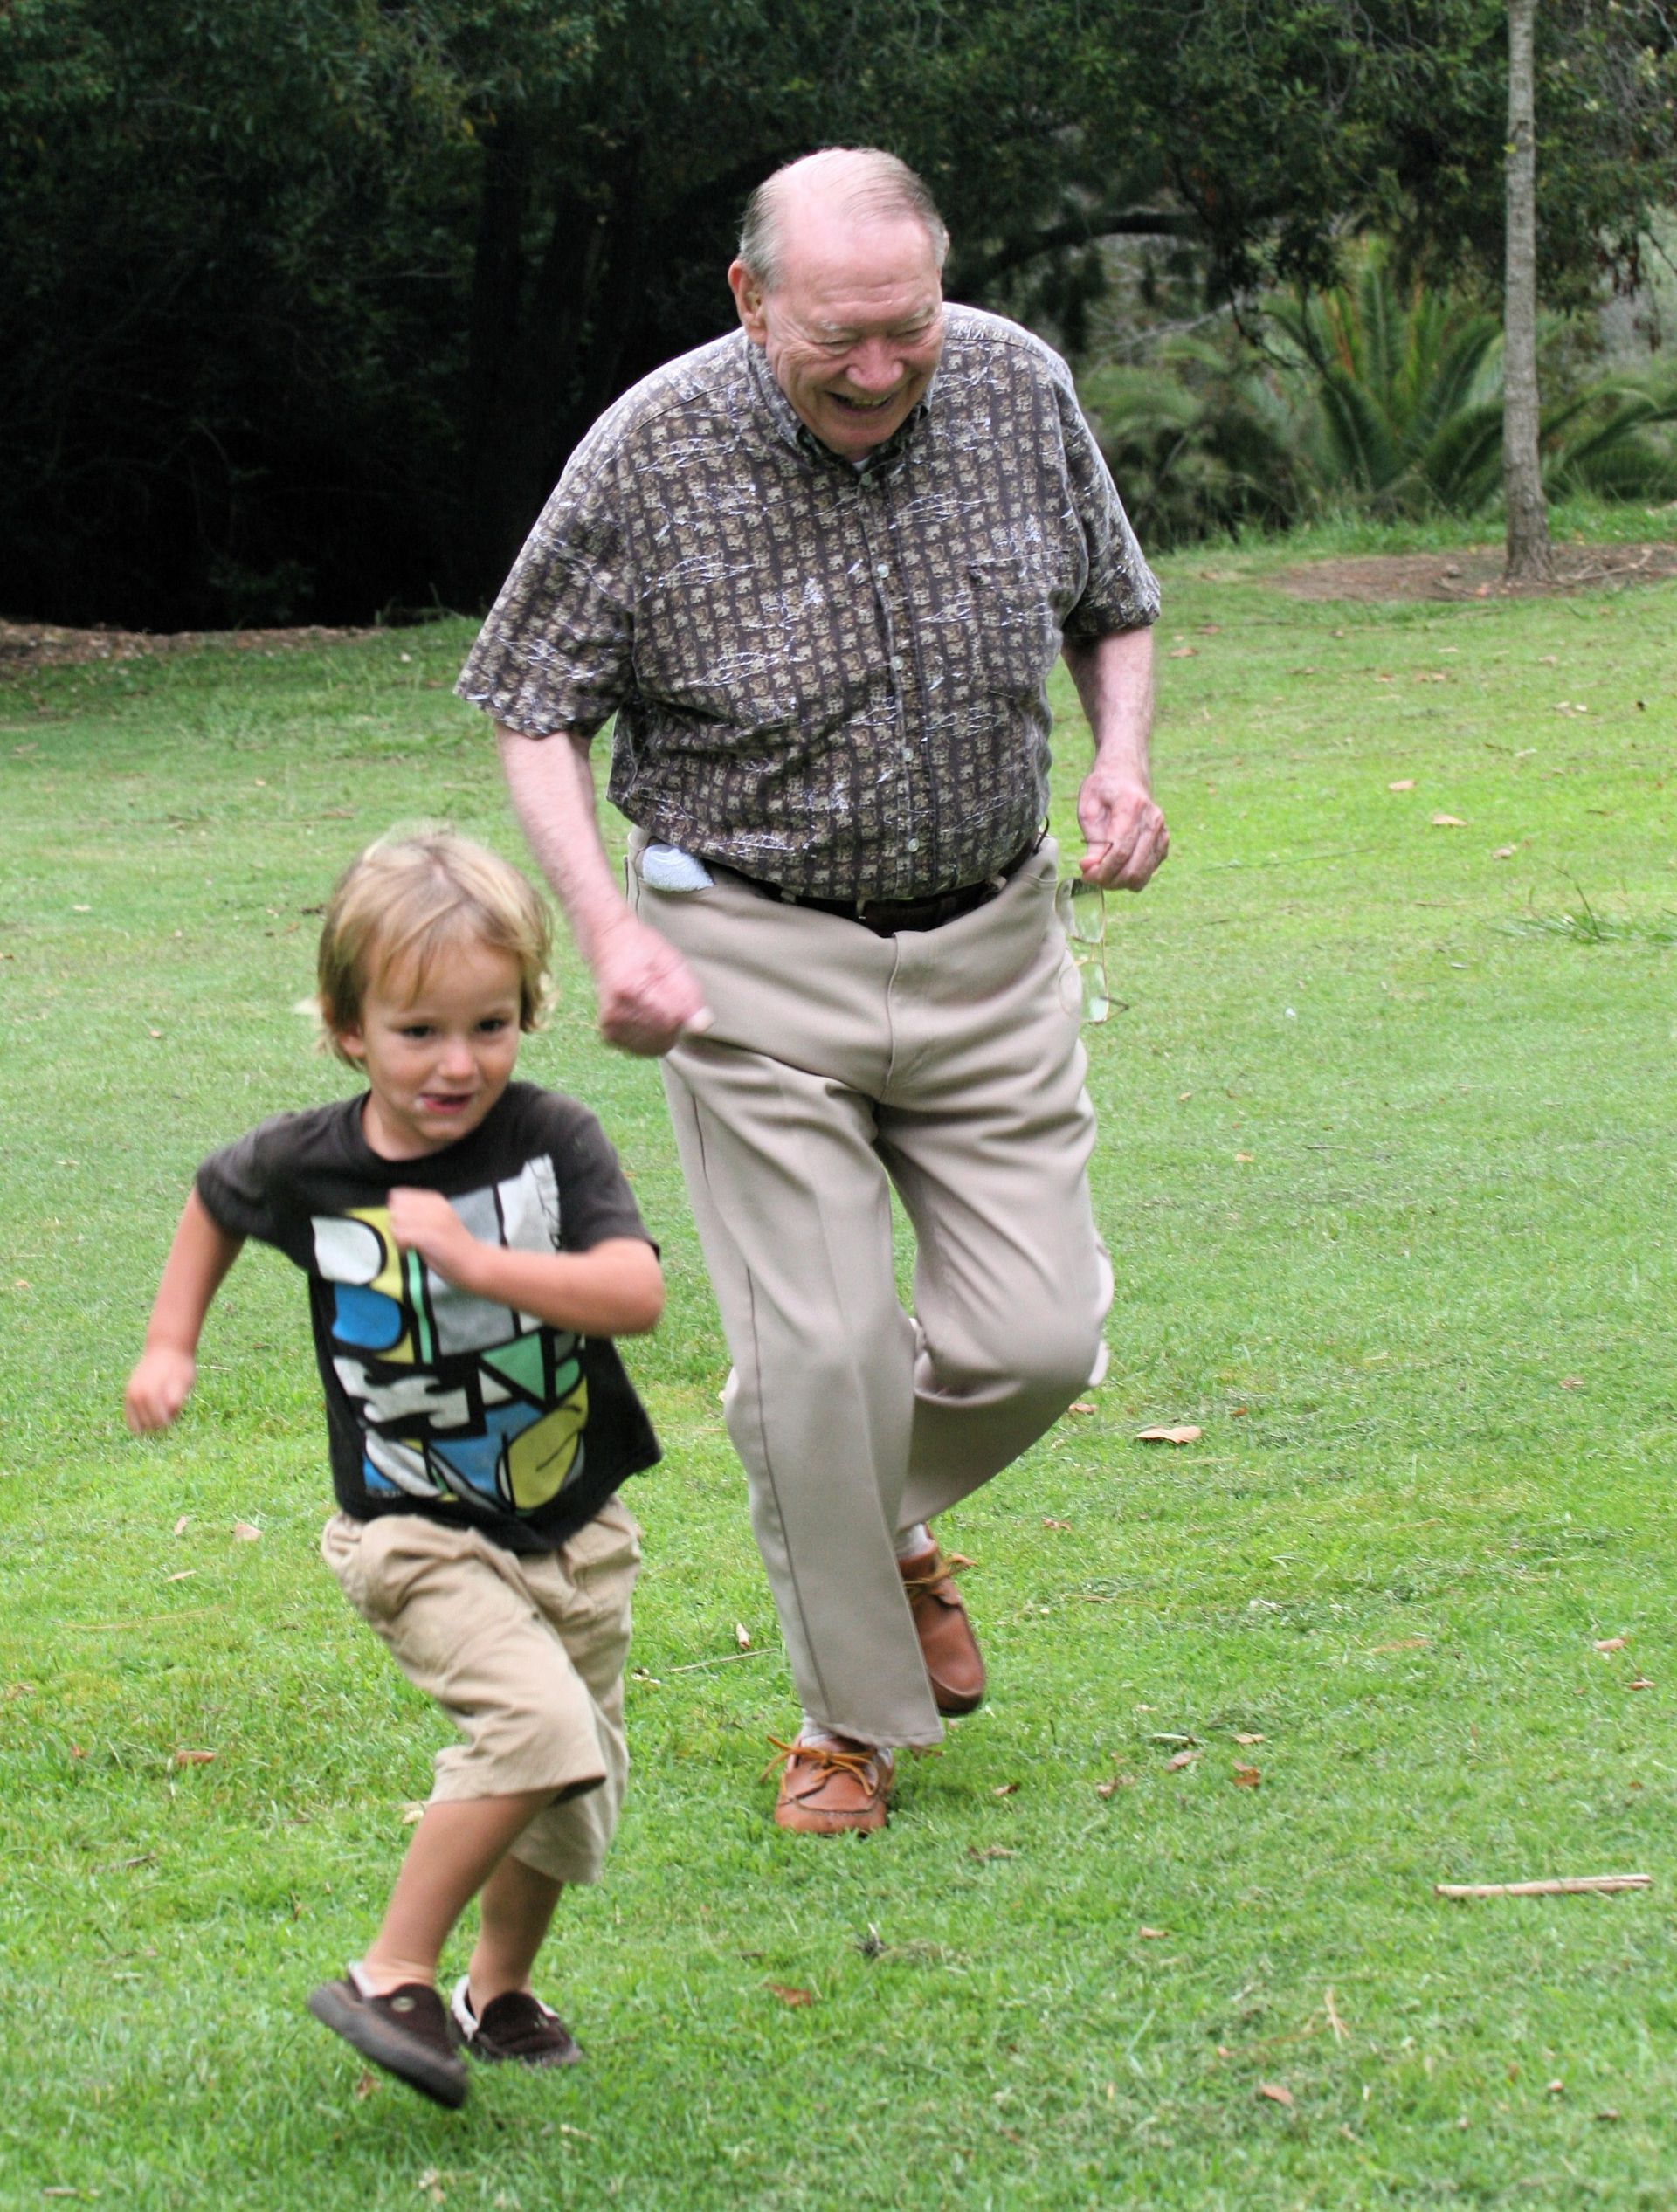 A young boy plays with his grandpa outside.